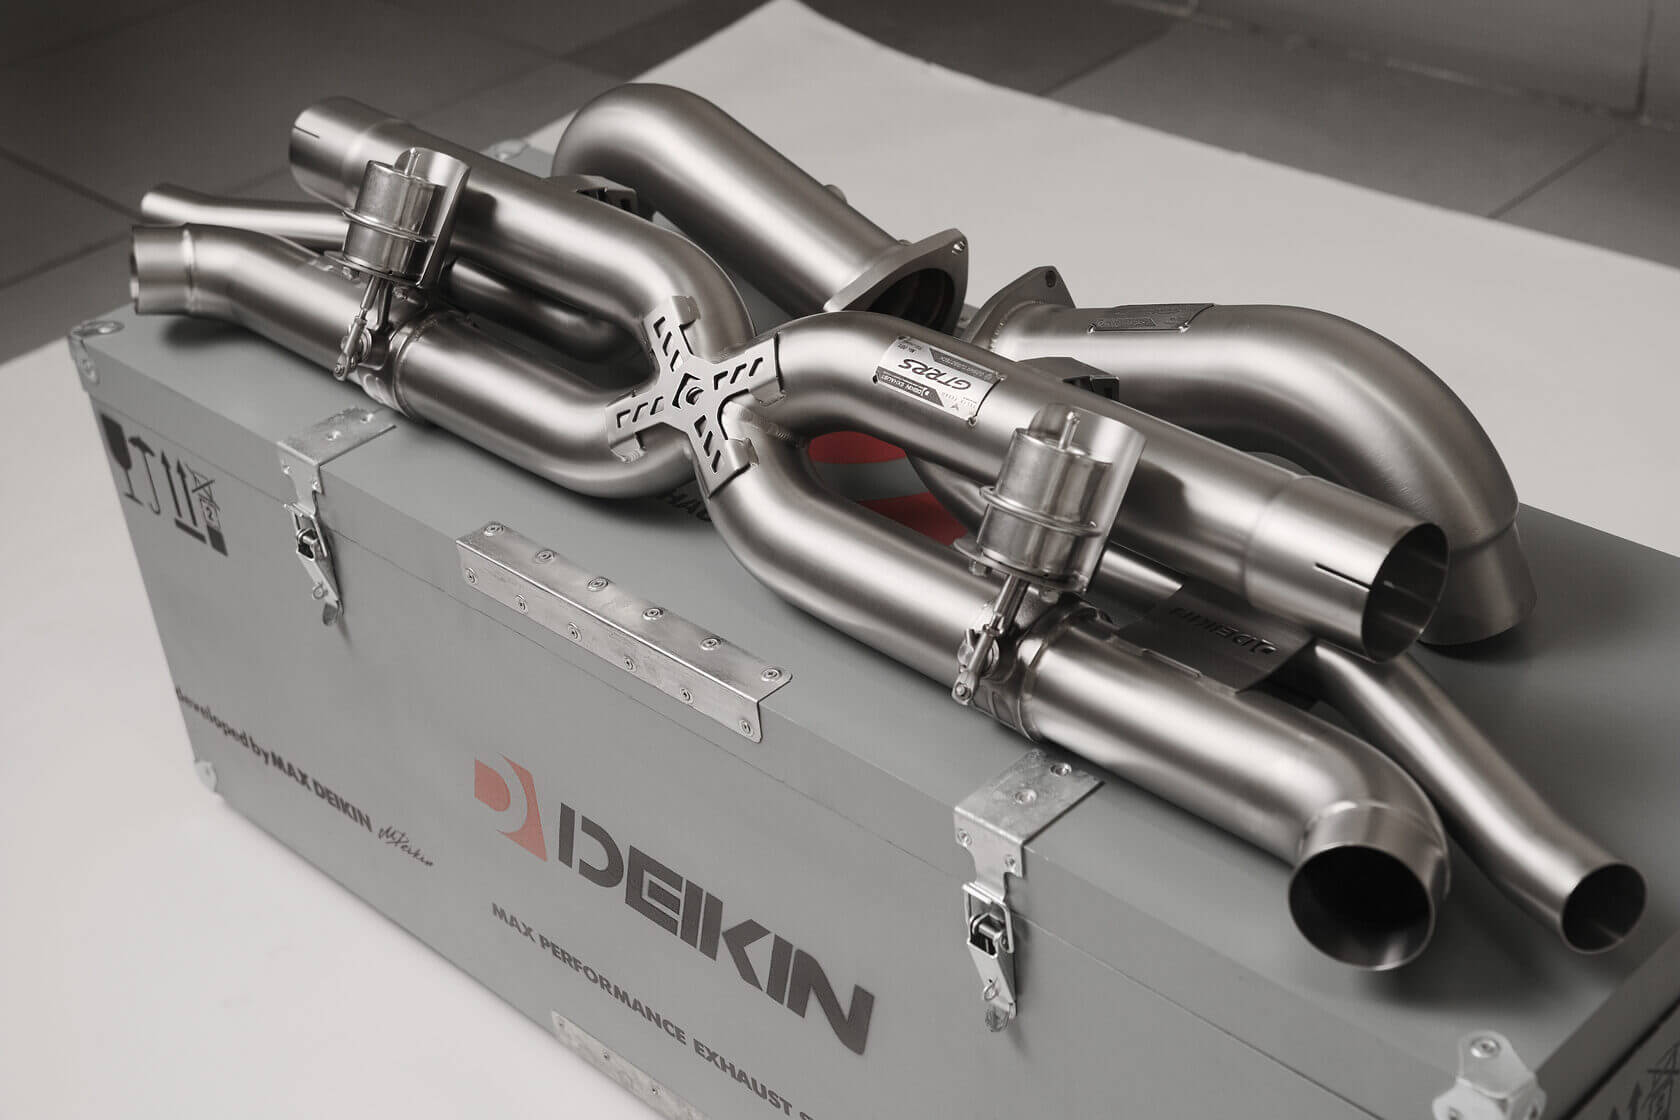 DEIKIN 10-PO.911.T/TS.991.2/R-ES-Ti-00 Exhaust system "Race" Titan for Porsche 911 Turbo/Turbo S (991.2) complete with downpipes without HeatShield Photo-0 